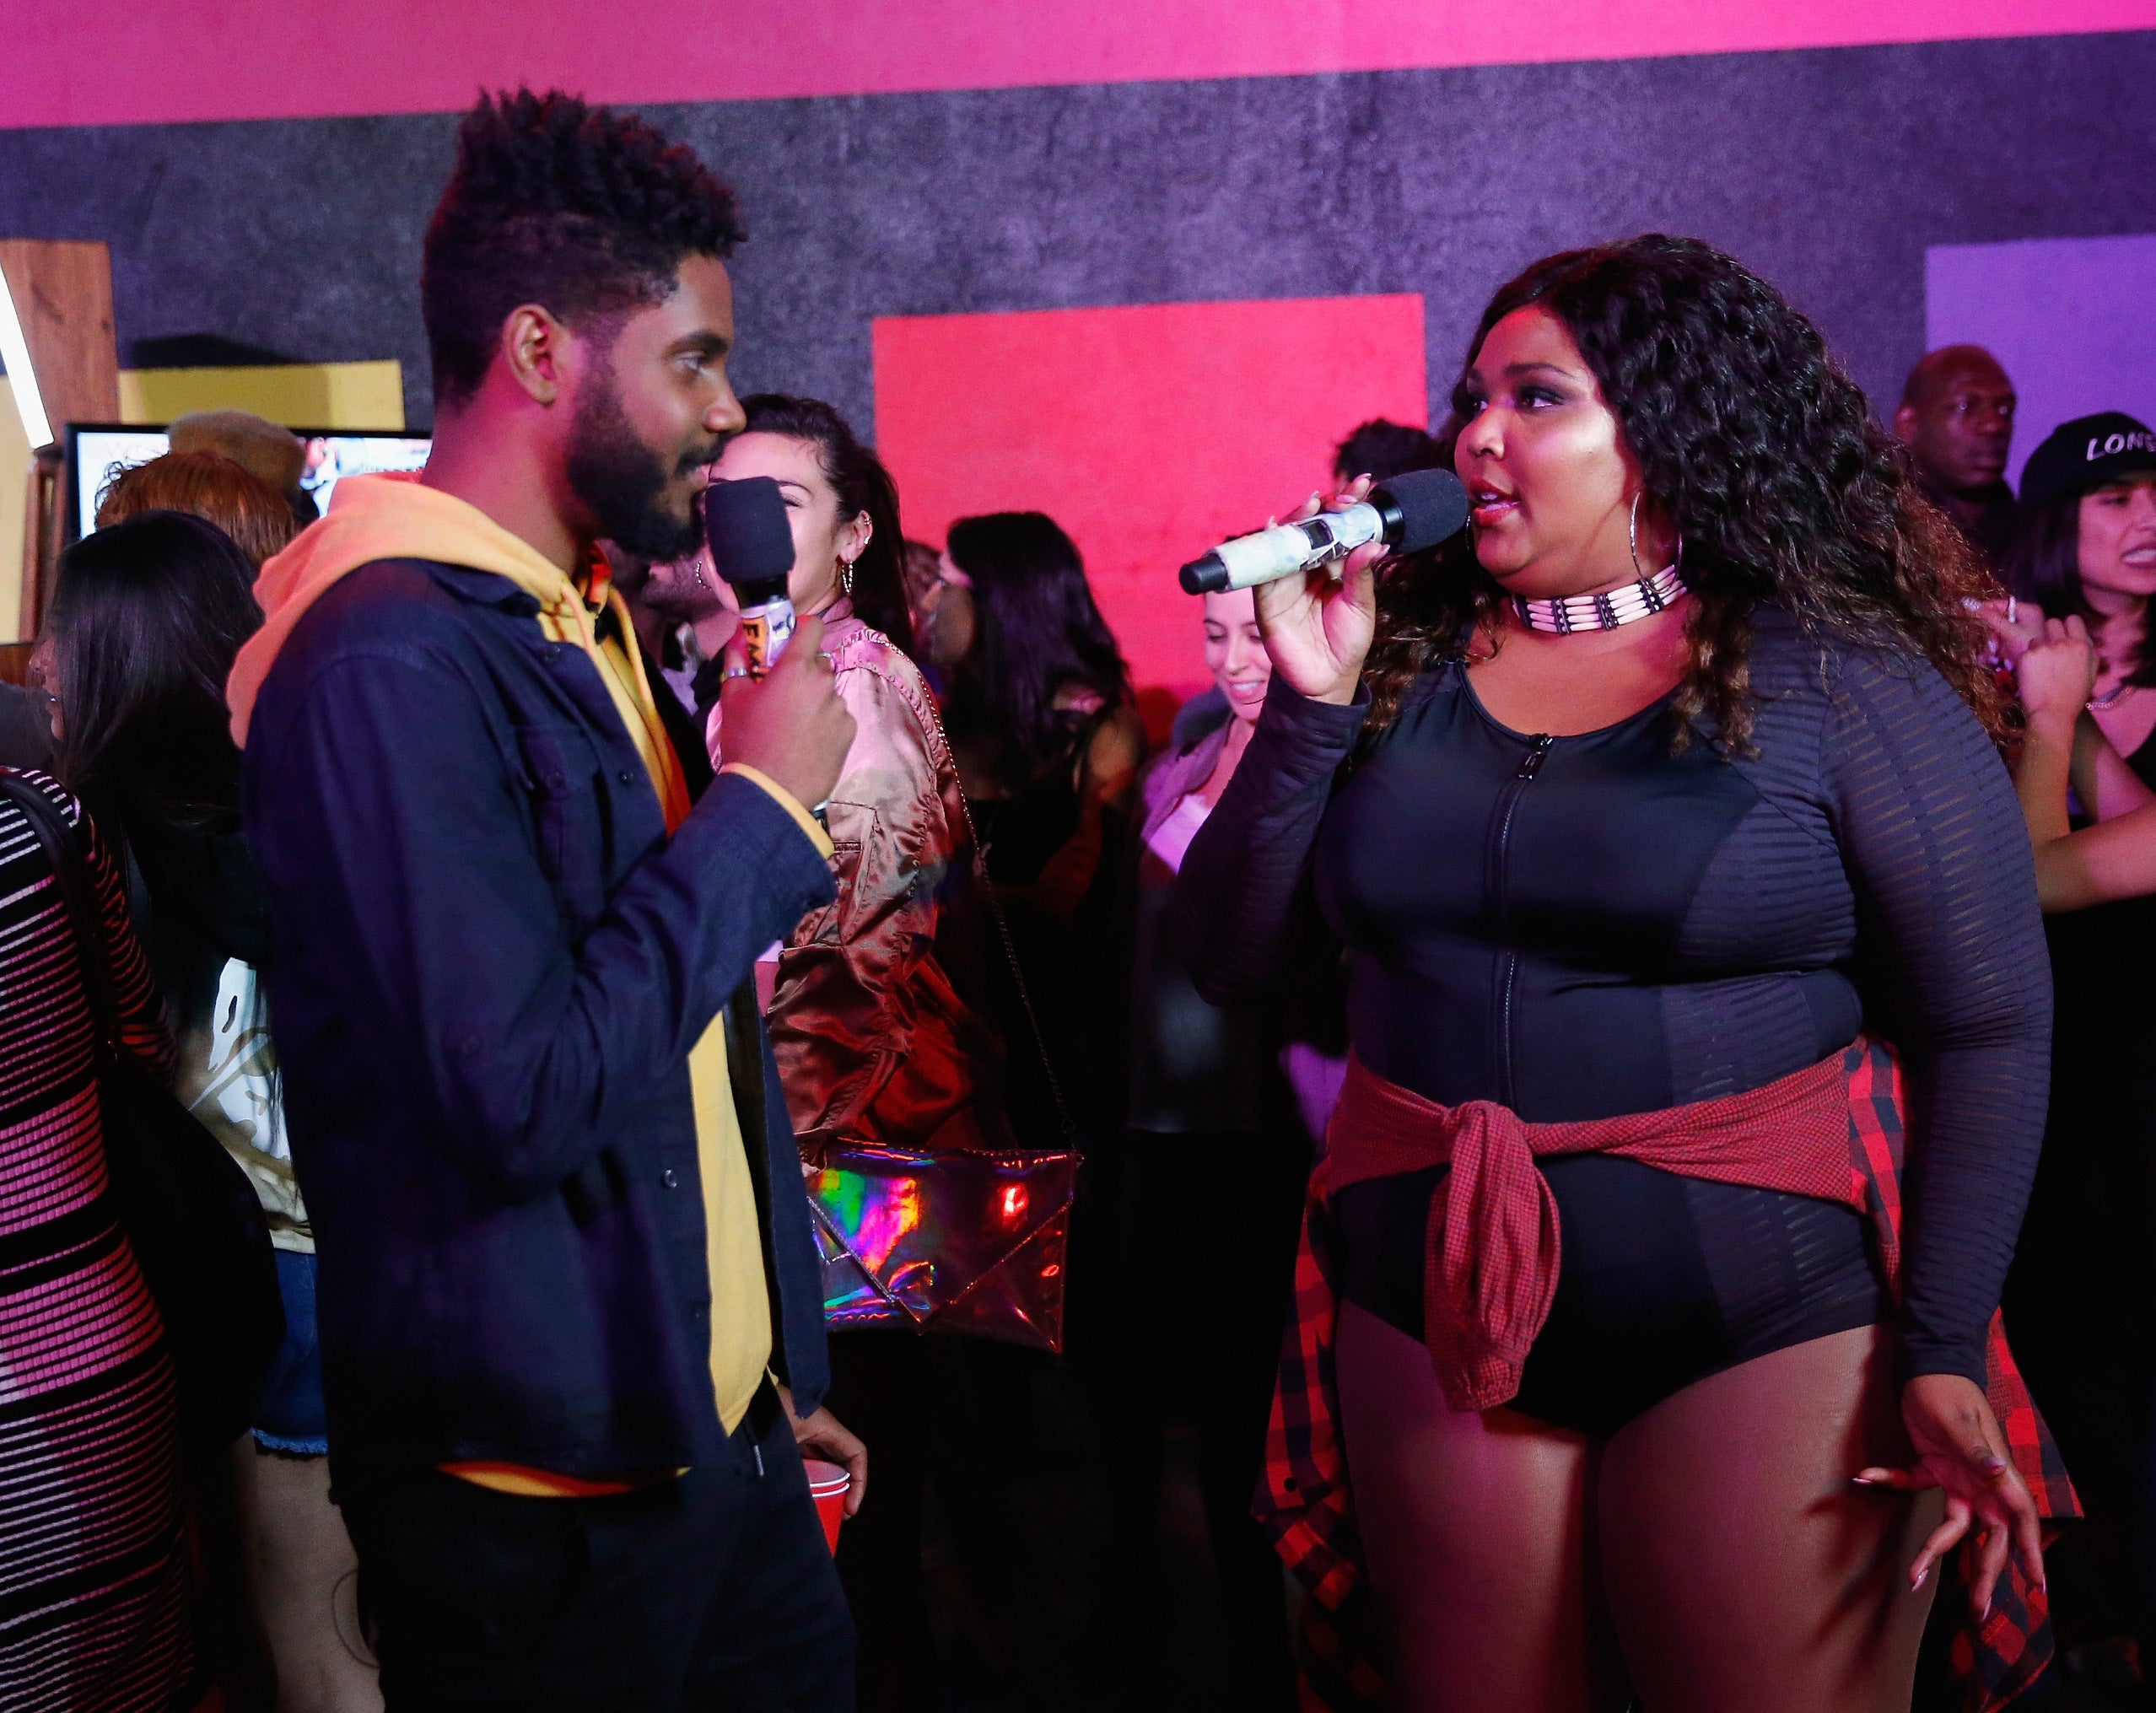 10 Things We Learned From ‘Love, Lizzo’